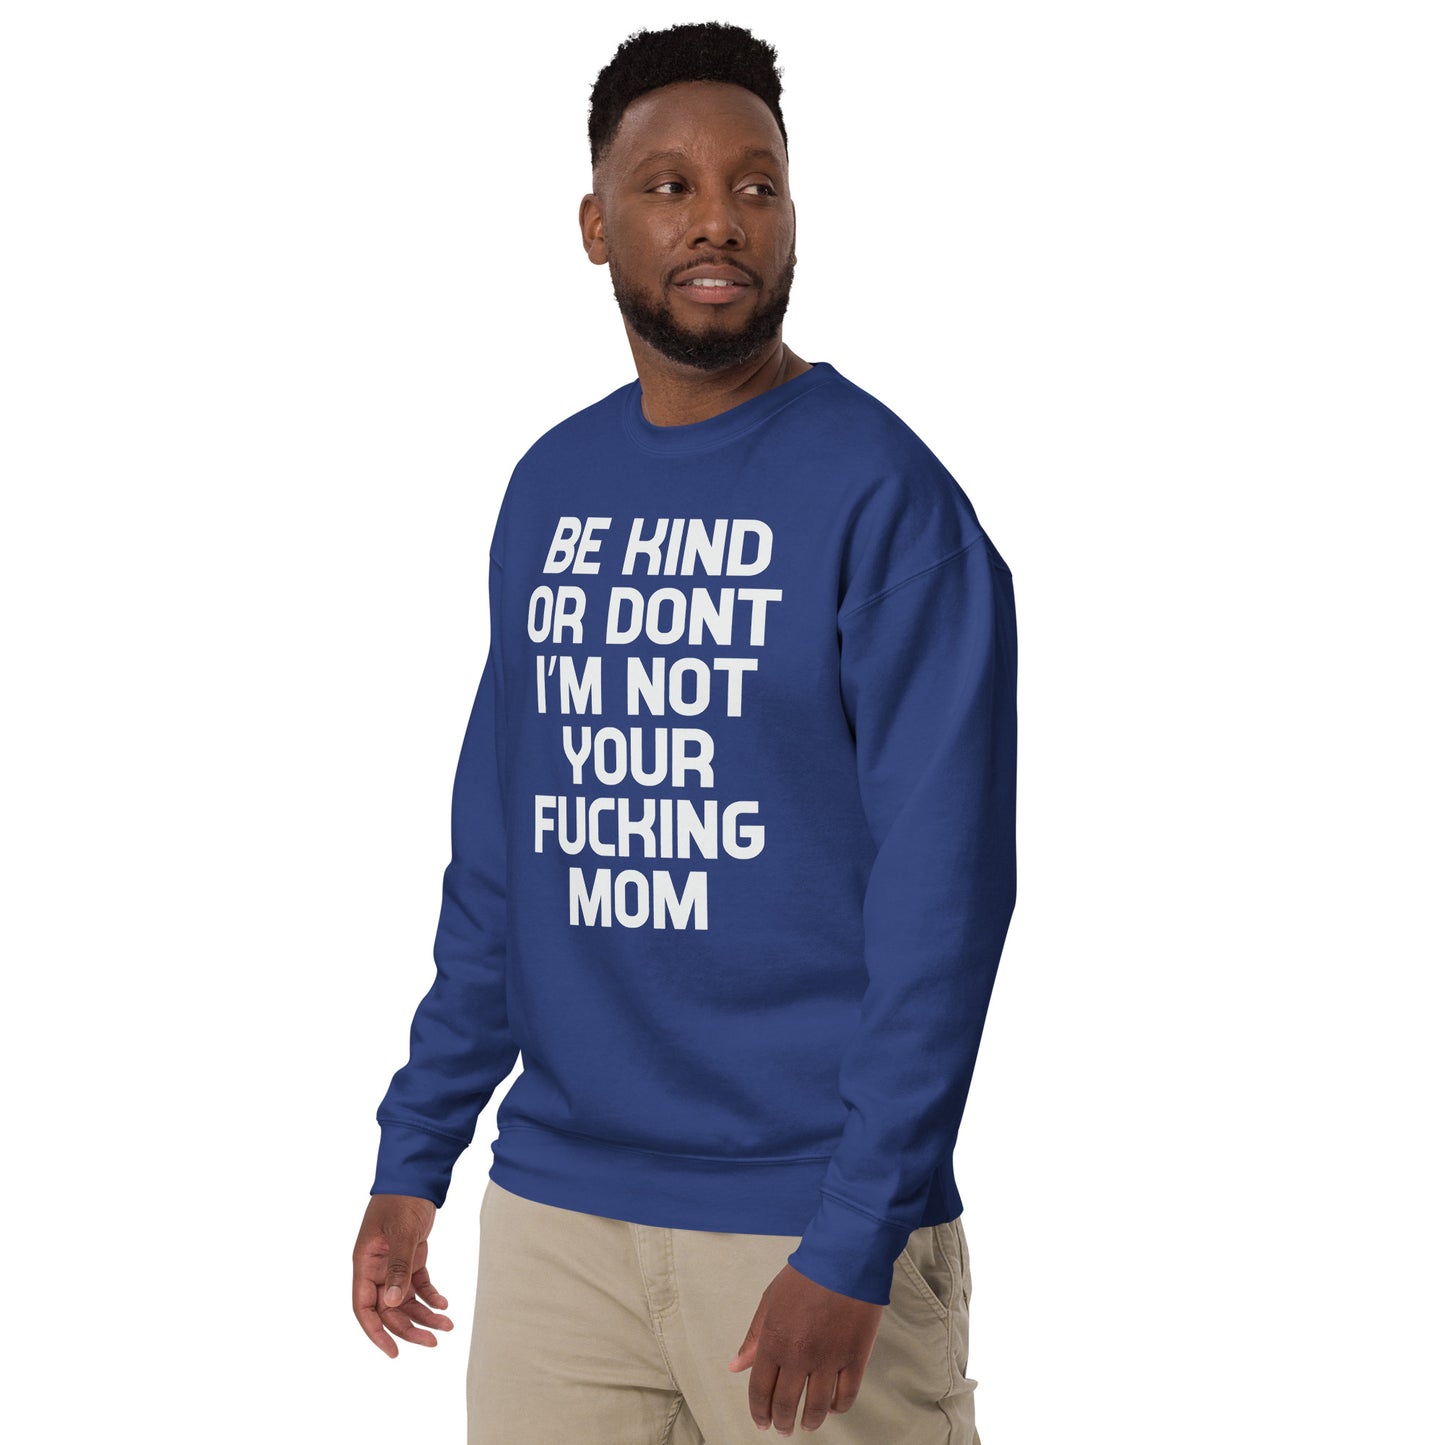 Be kind or not I am not your Mom Unisex Premium Sweatshirt